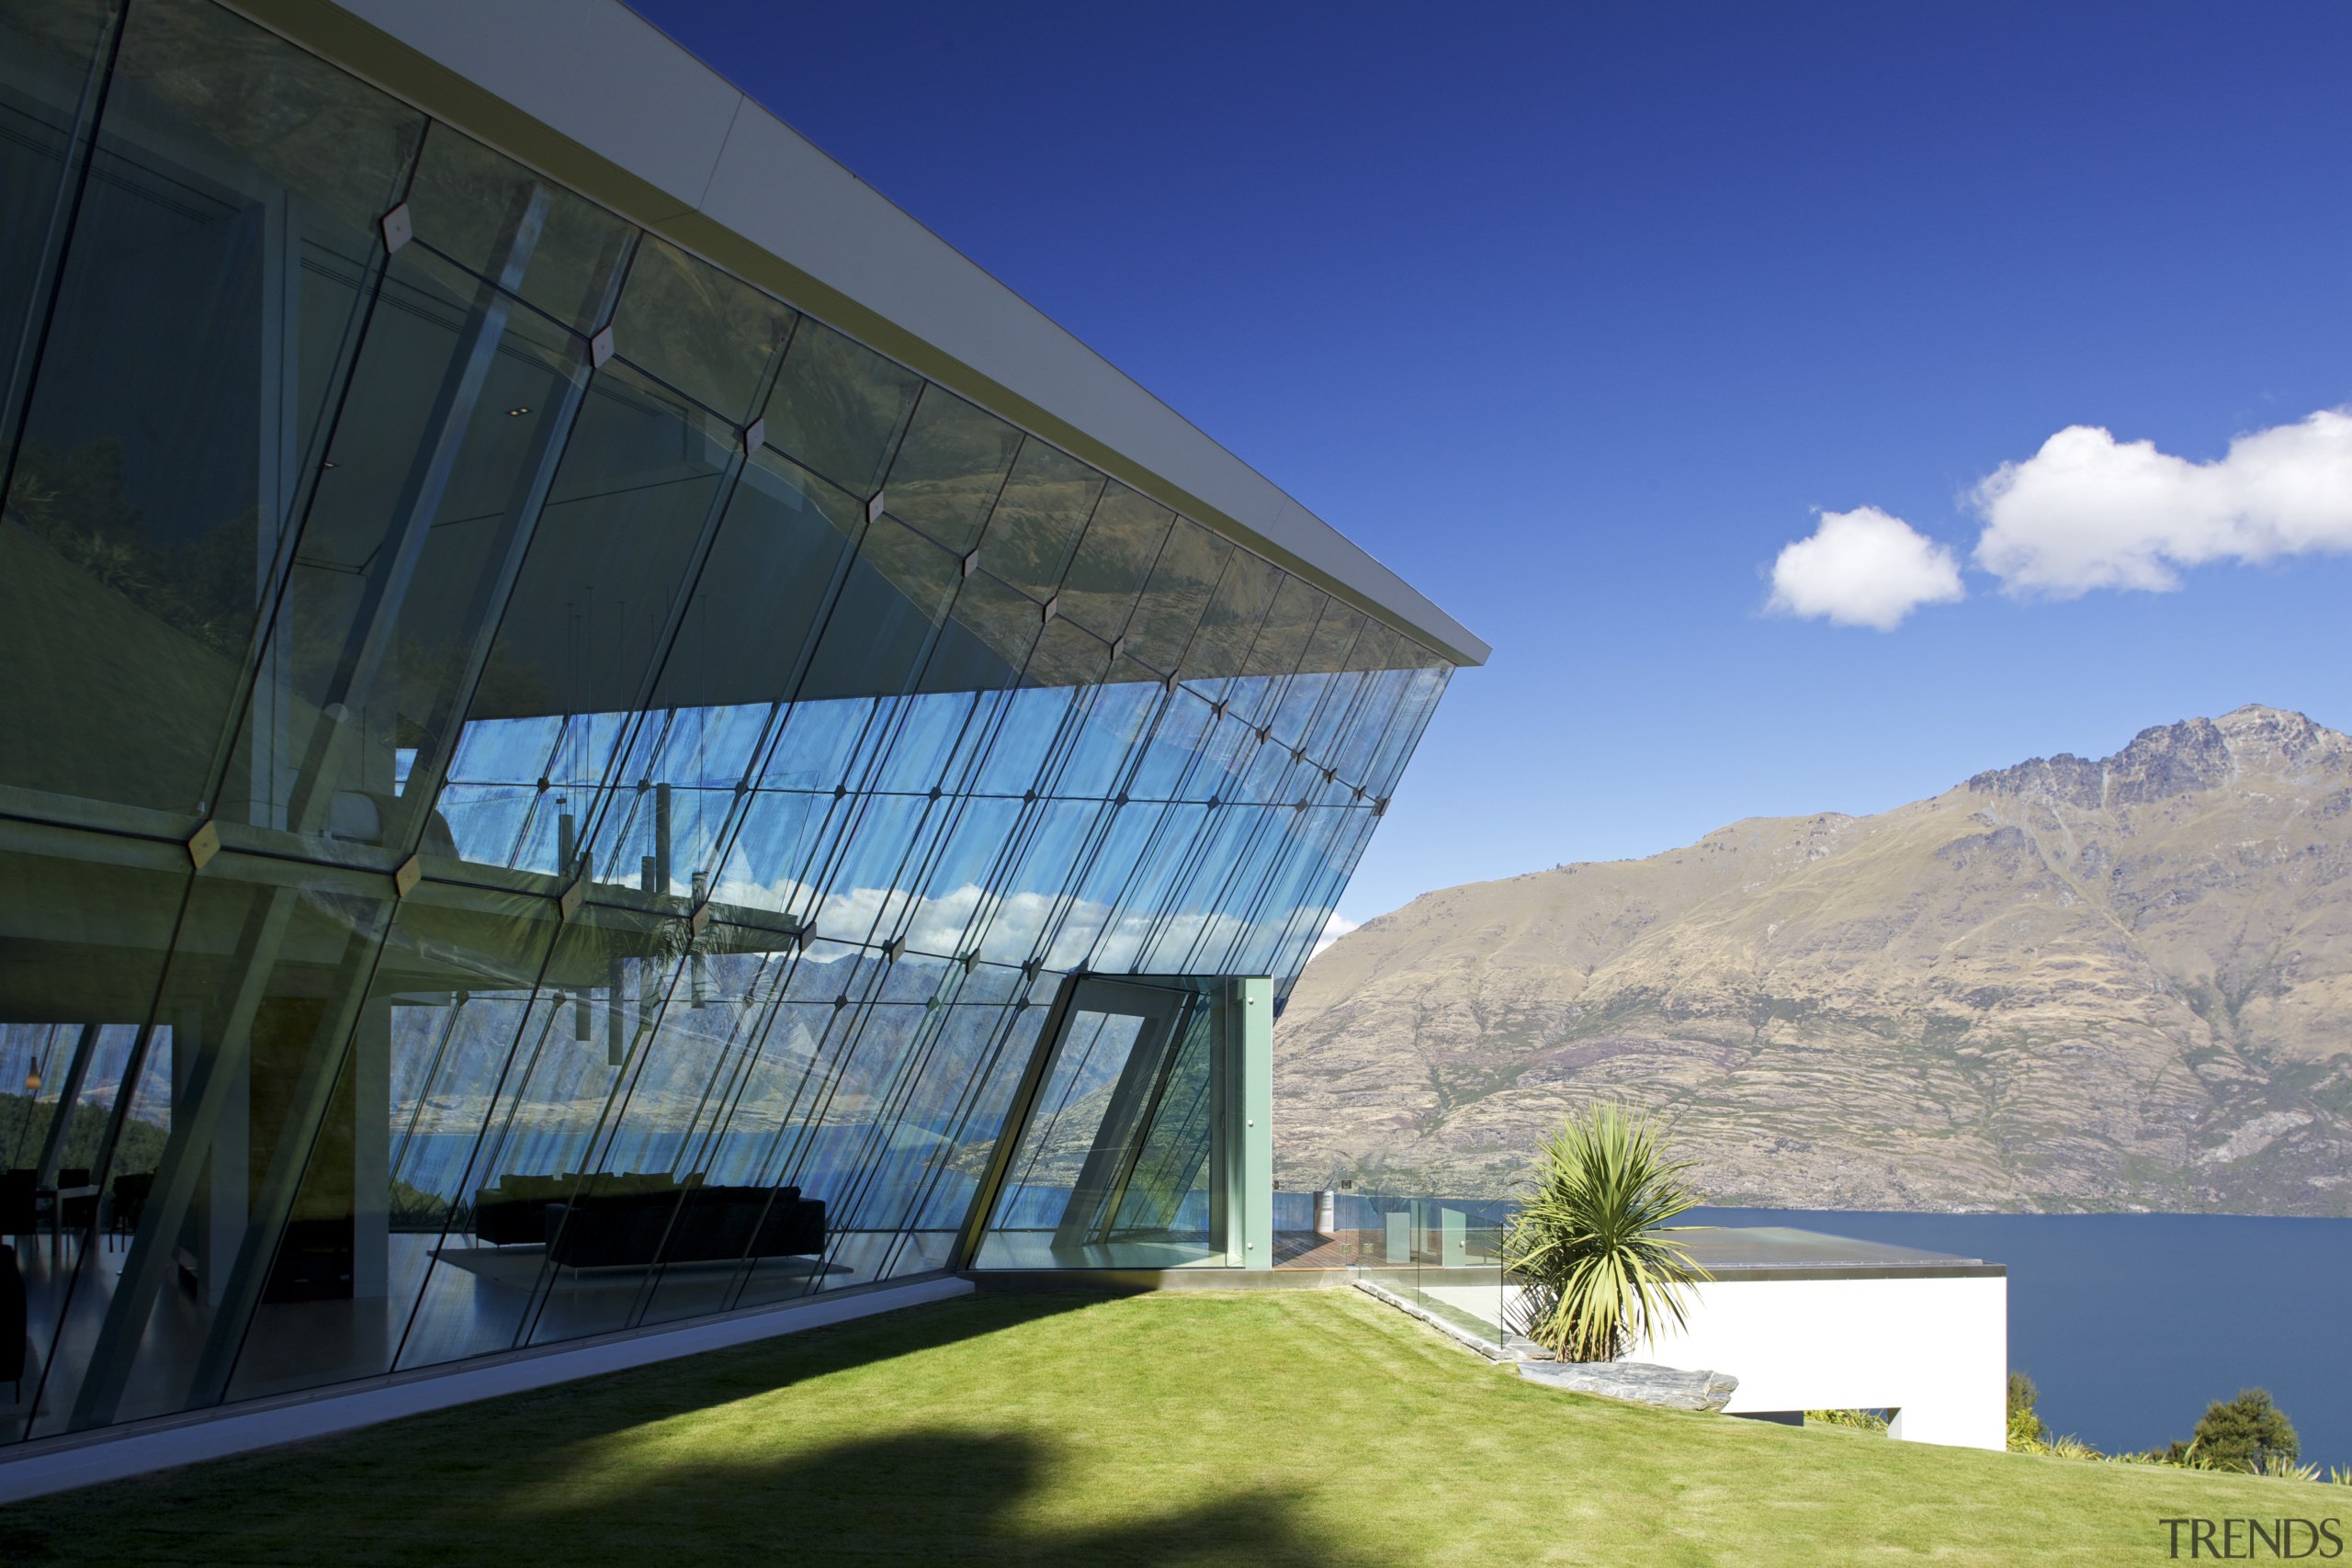 This glass-walled house appears to emerge directly from architecture, building, corporate headquarters, daylighting, elevation, estate, facade, headquarters, home, house, mountain range, property, real estate, roof, sky, blue, black